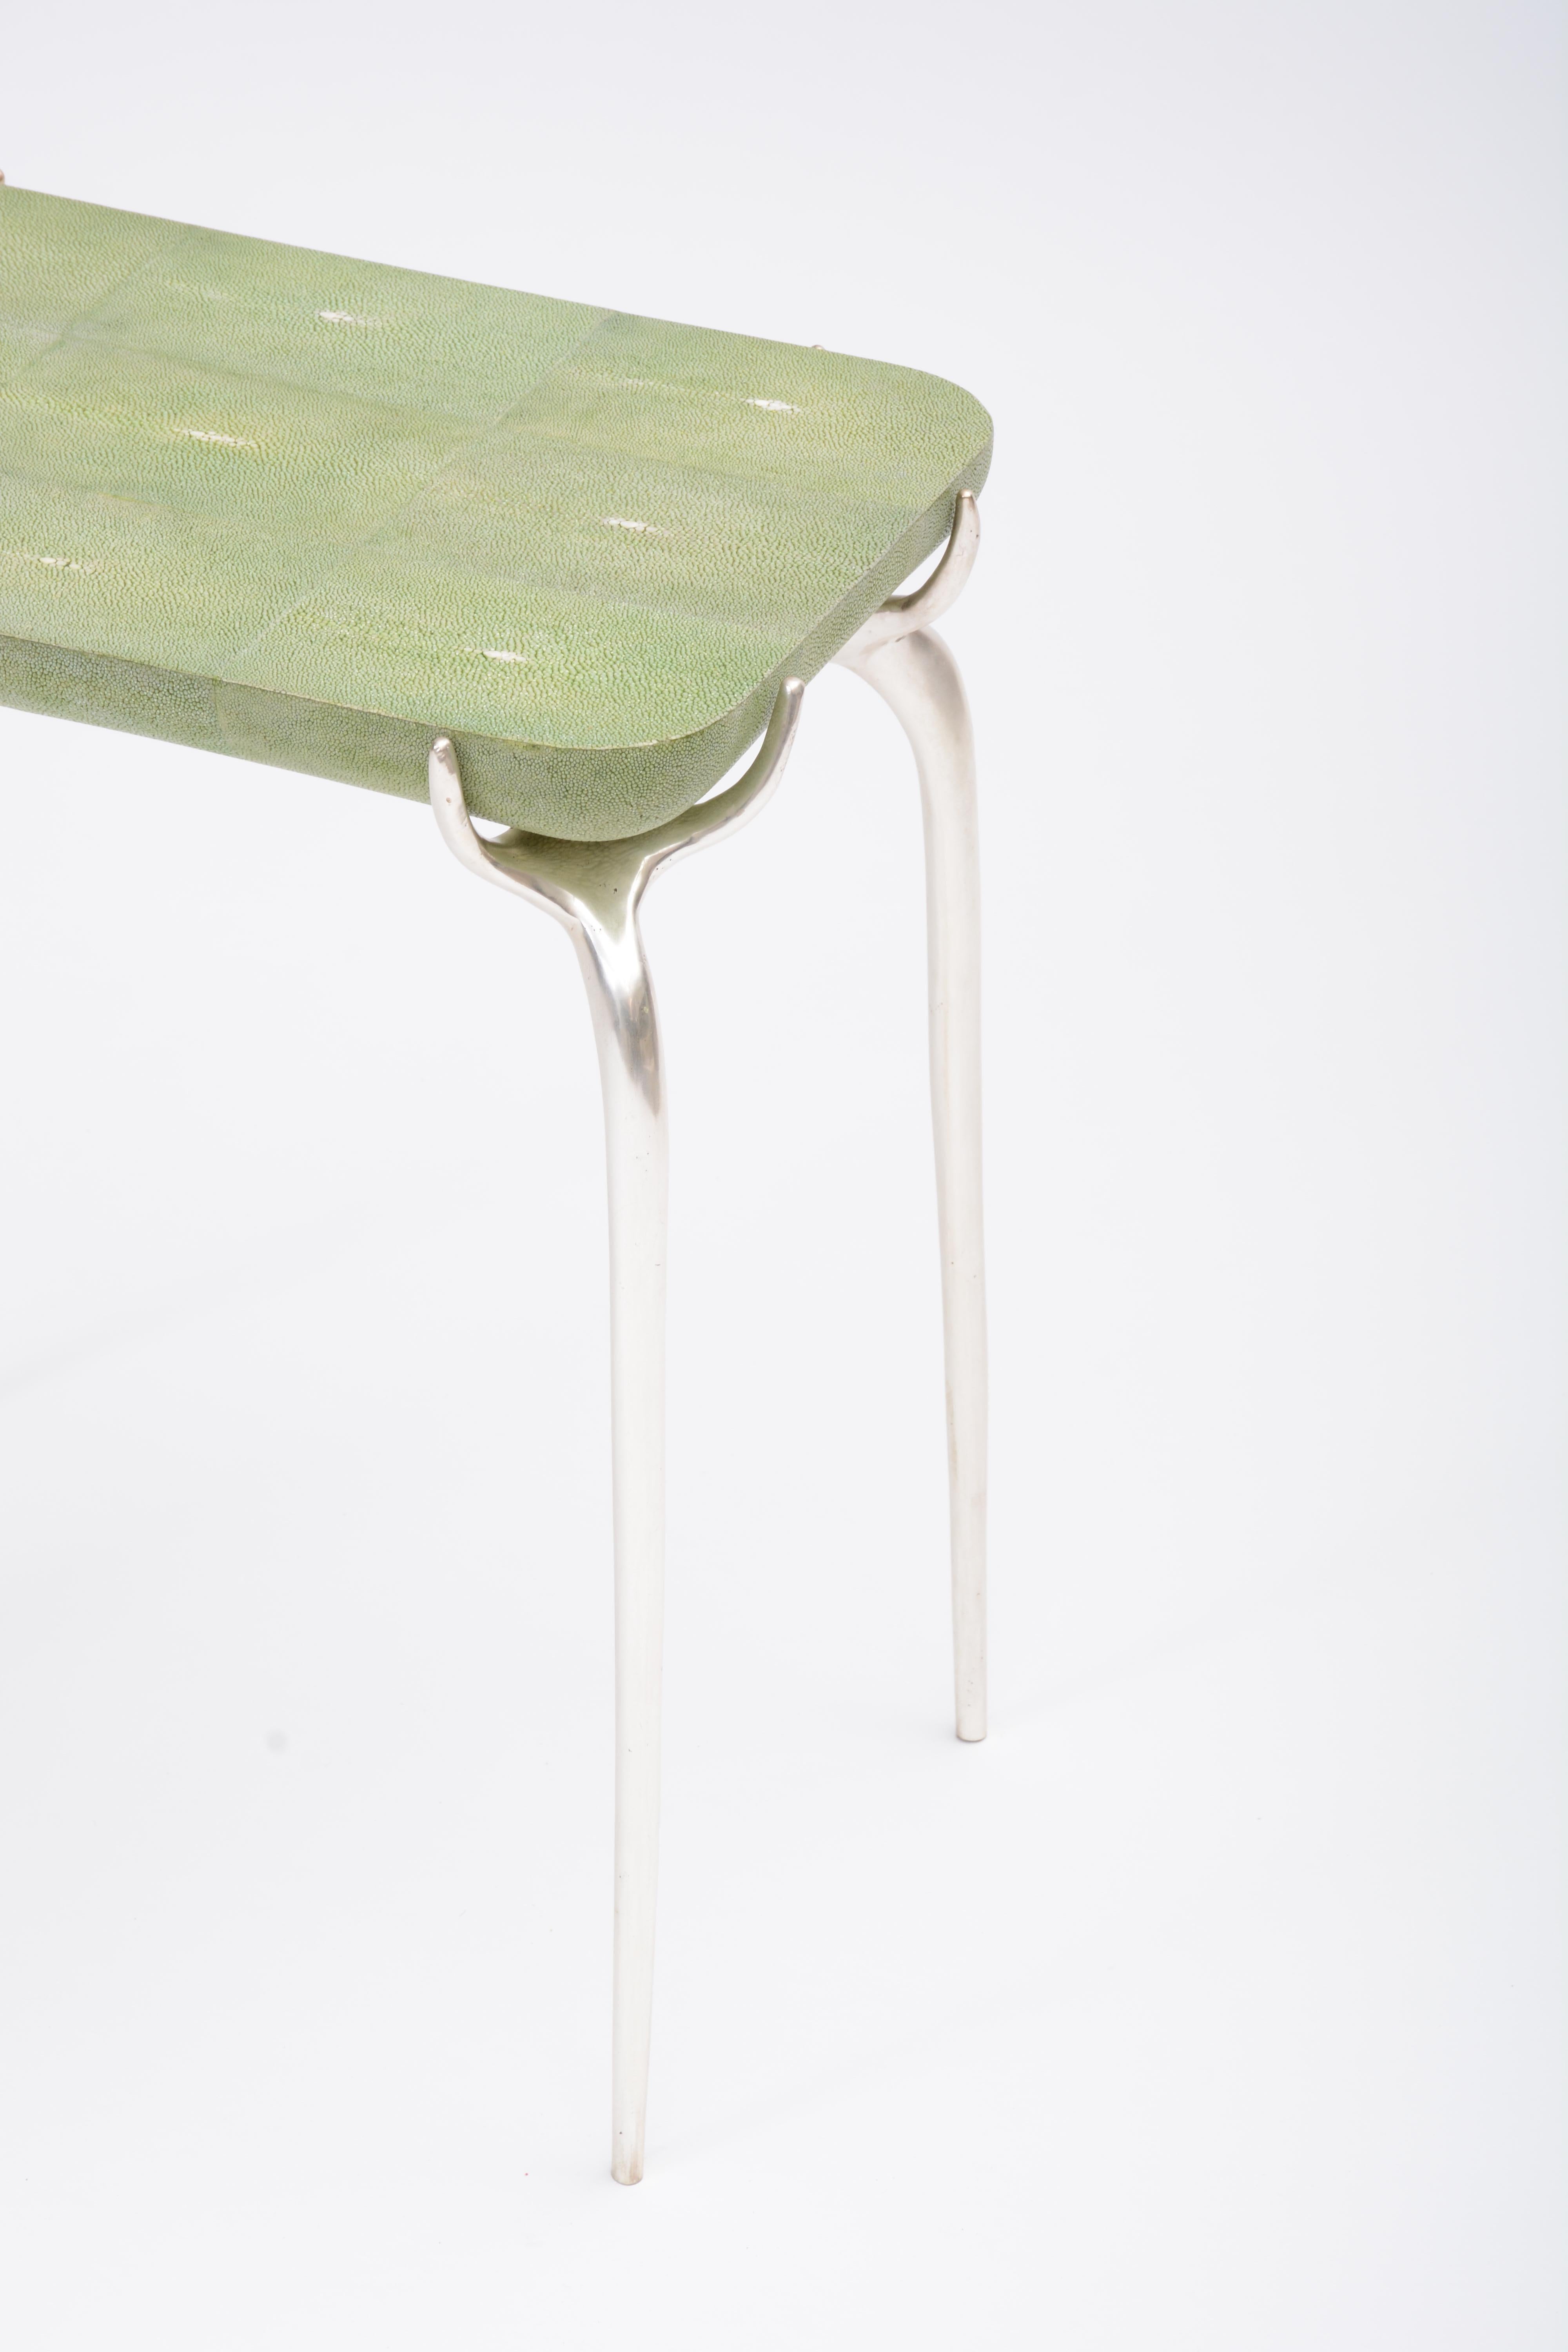 European Jewel Side Table with Bronze, Silver Leaf, and Green Shagreen by Elan Atelier